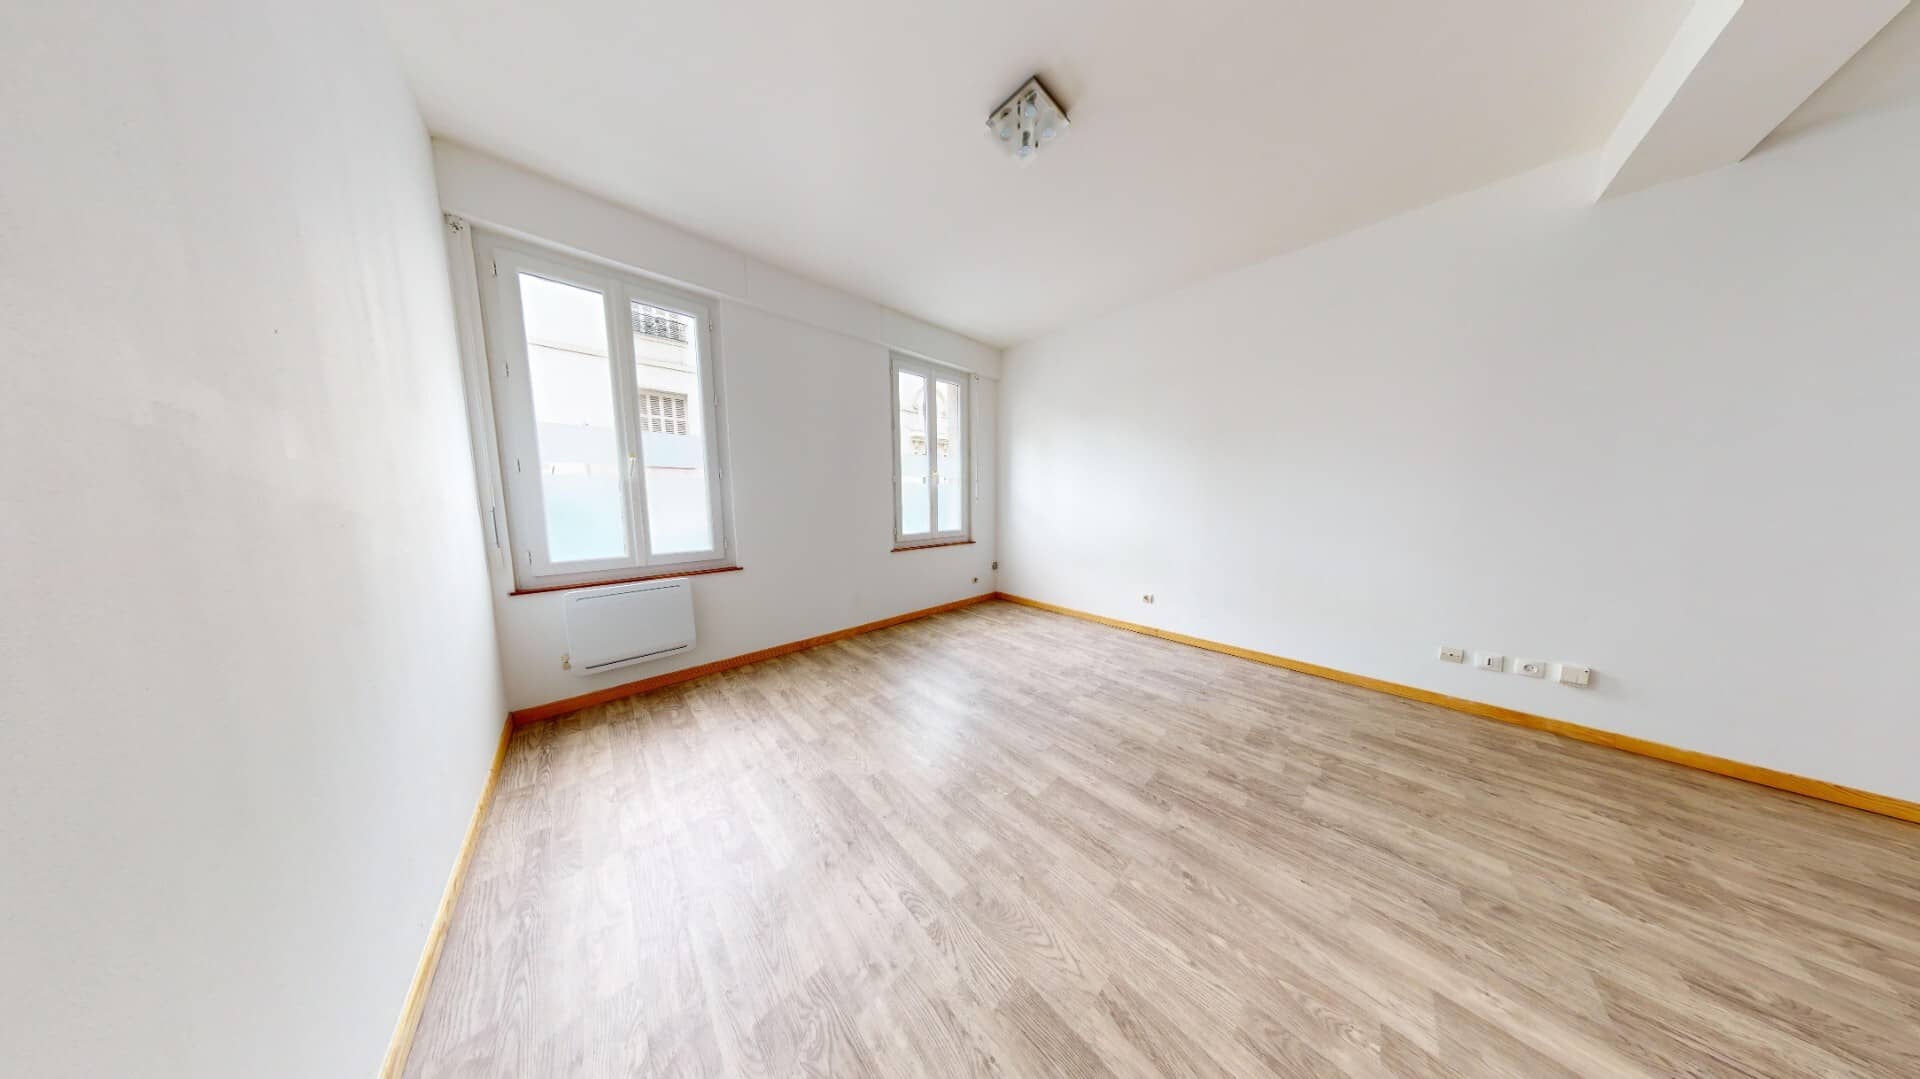 Location Appartement type F1 Le Havre 1002-1